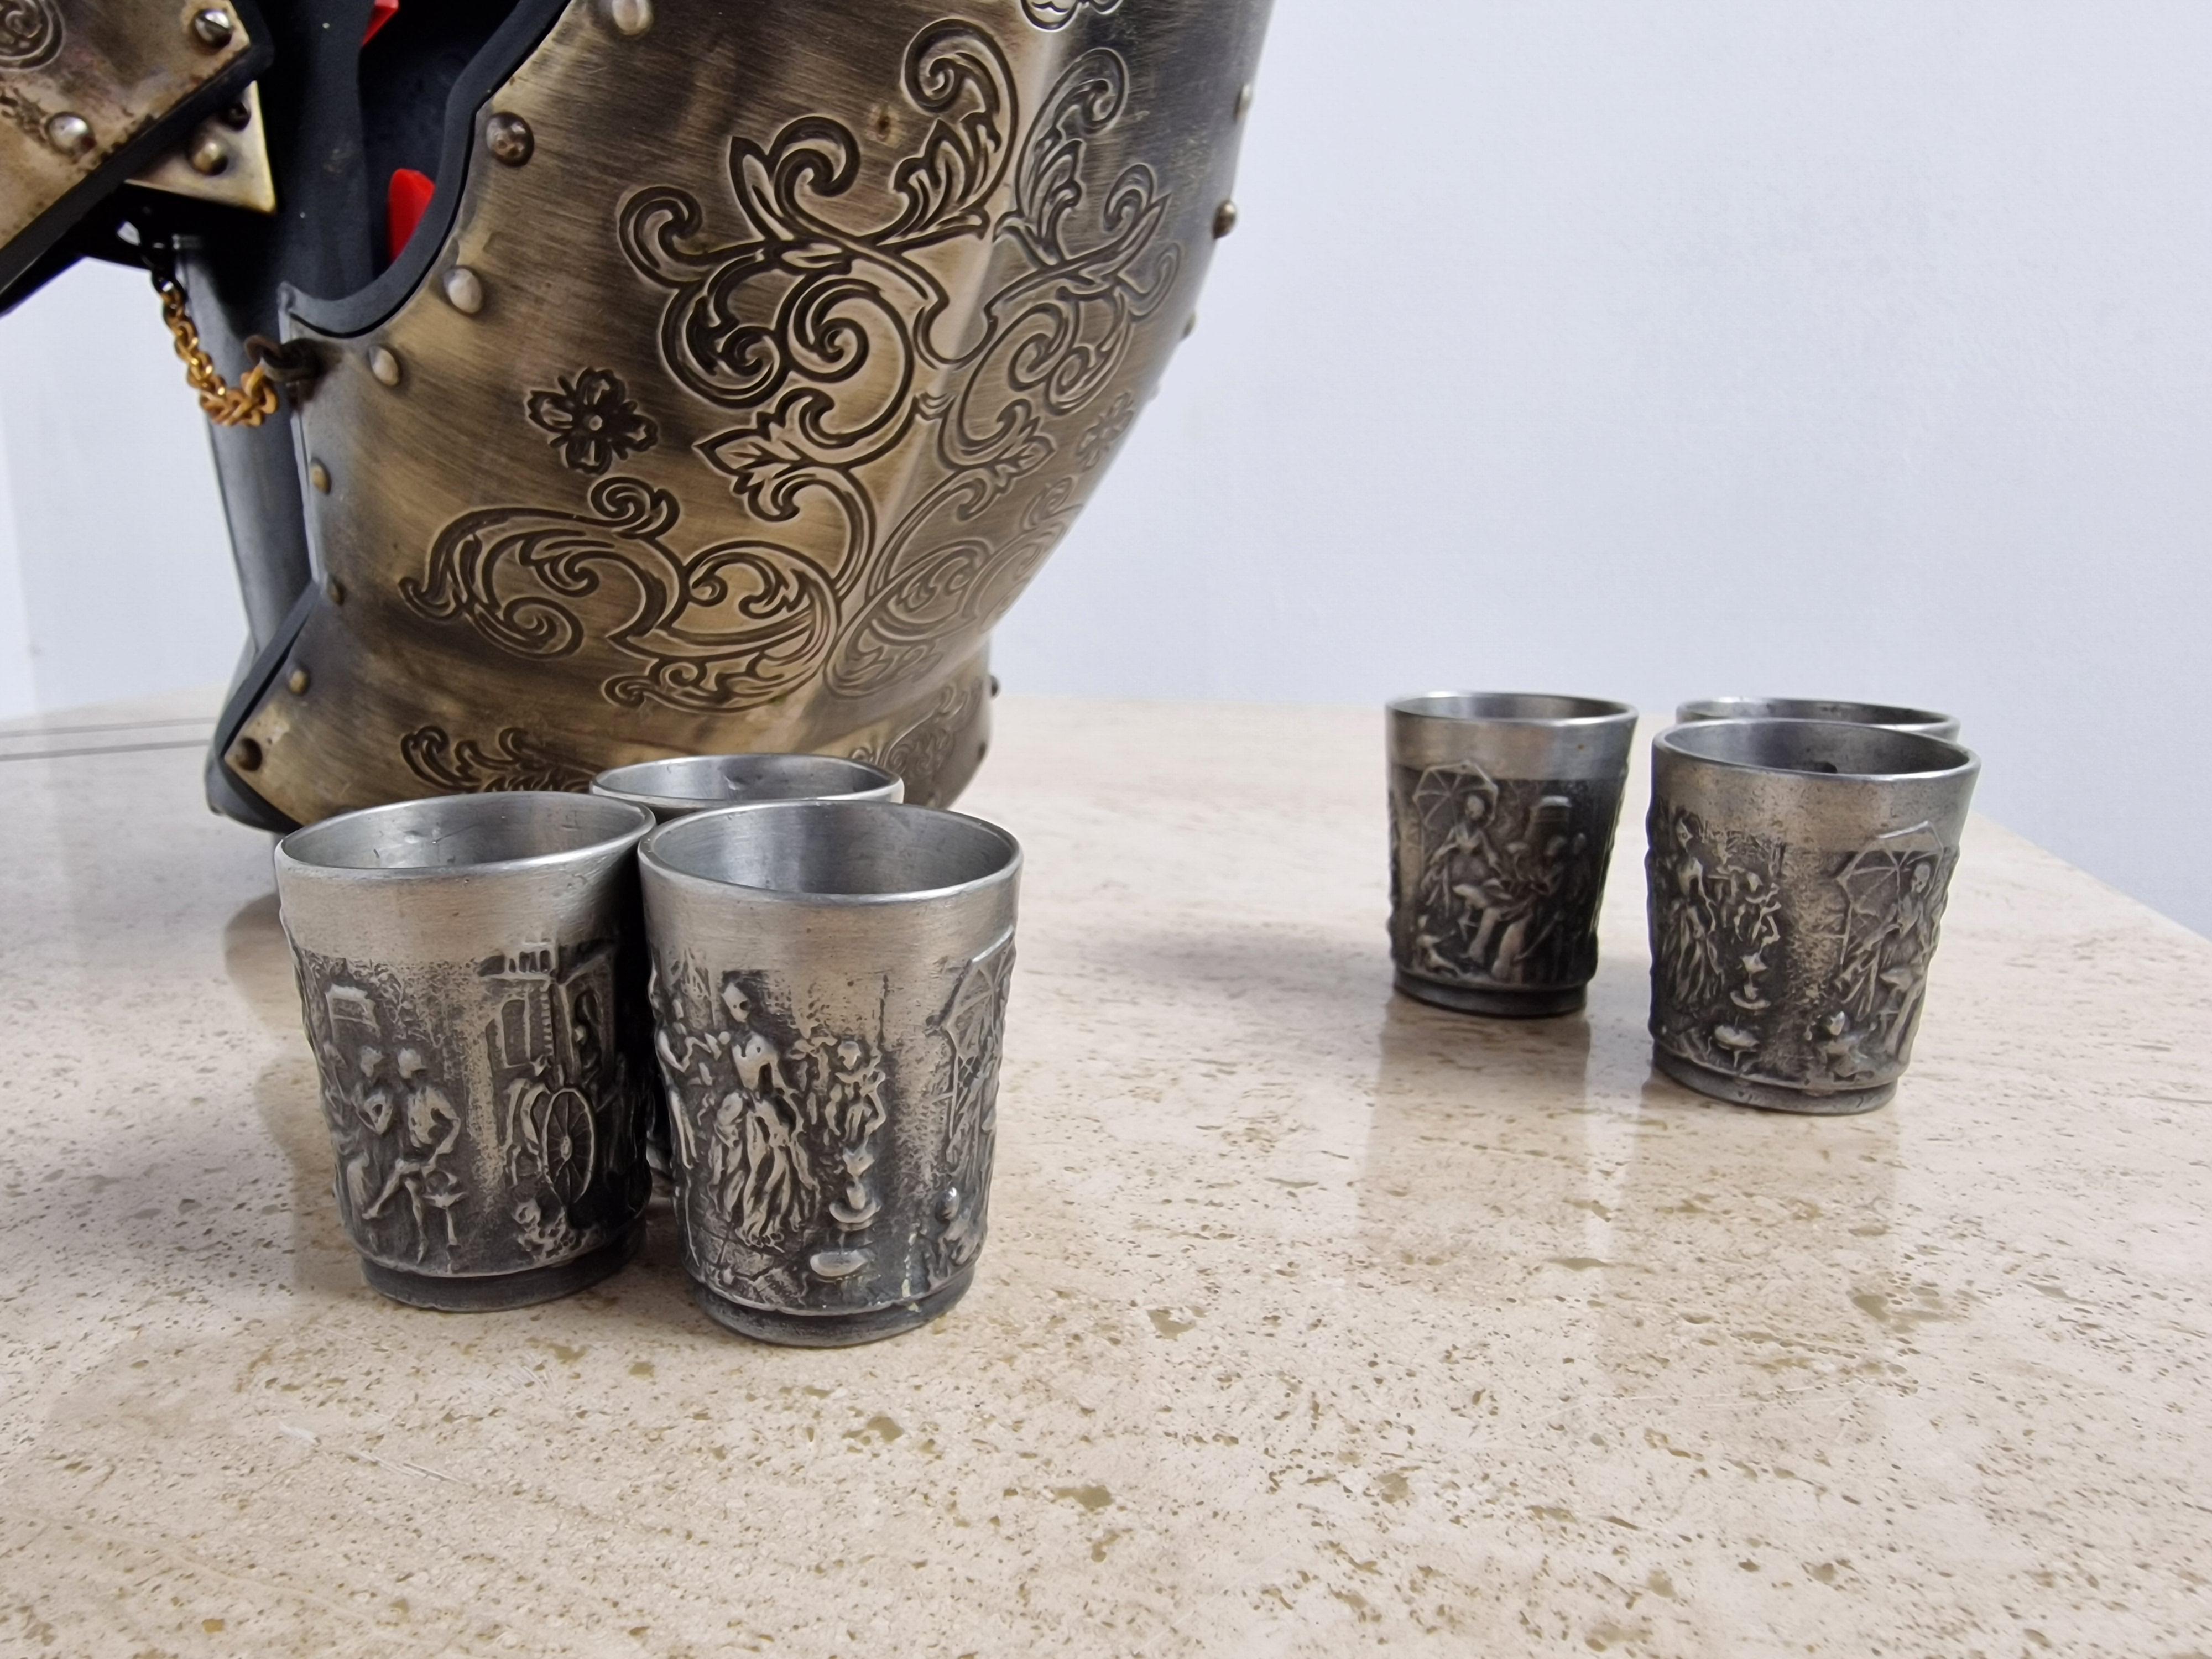 This is a rare and unusual, detailed and well-produced bar set containing 6 shot glasses and a bottle, all within a stand modeled as the upper body of a Medieval knight.

The front has an ornately scrolled metal breast plate which pulls down like